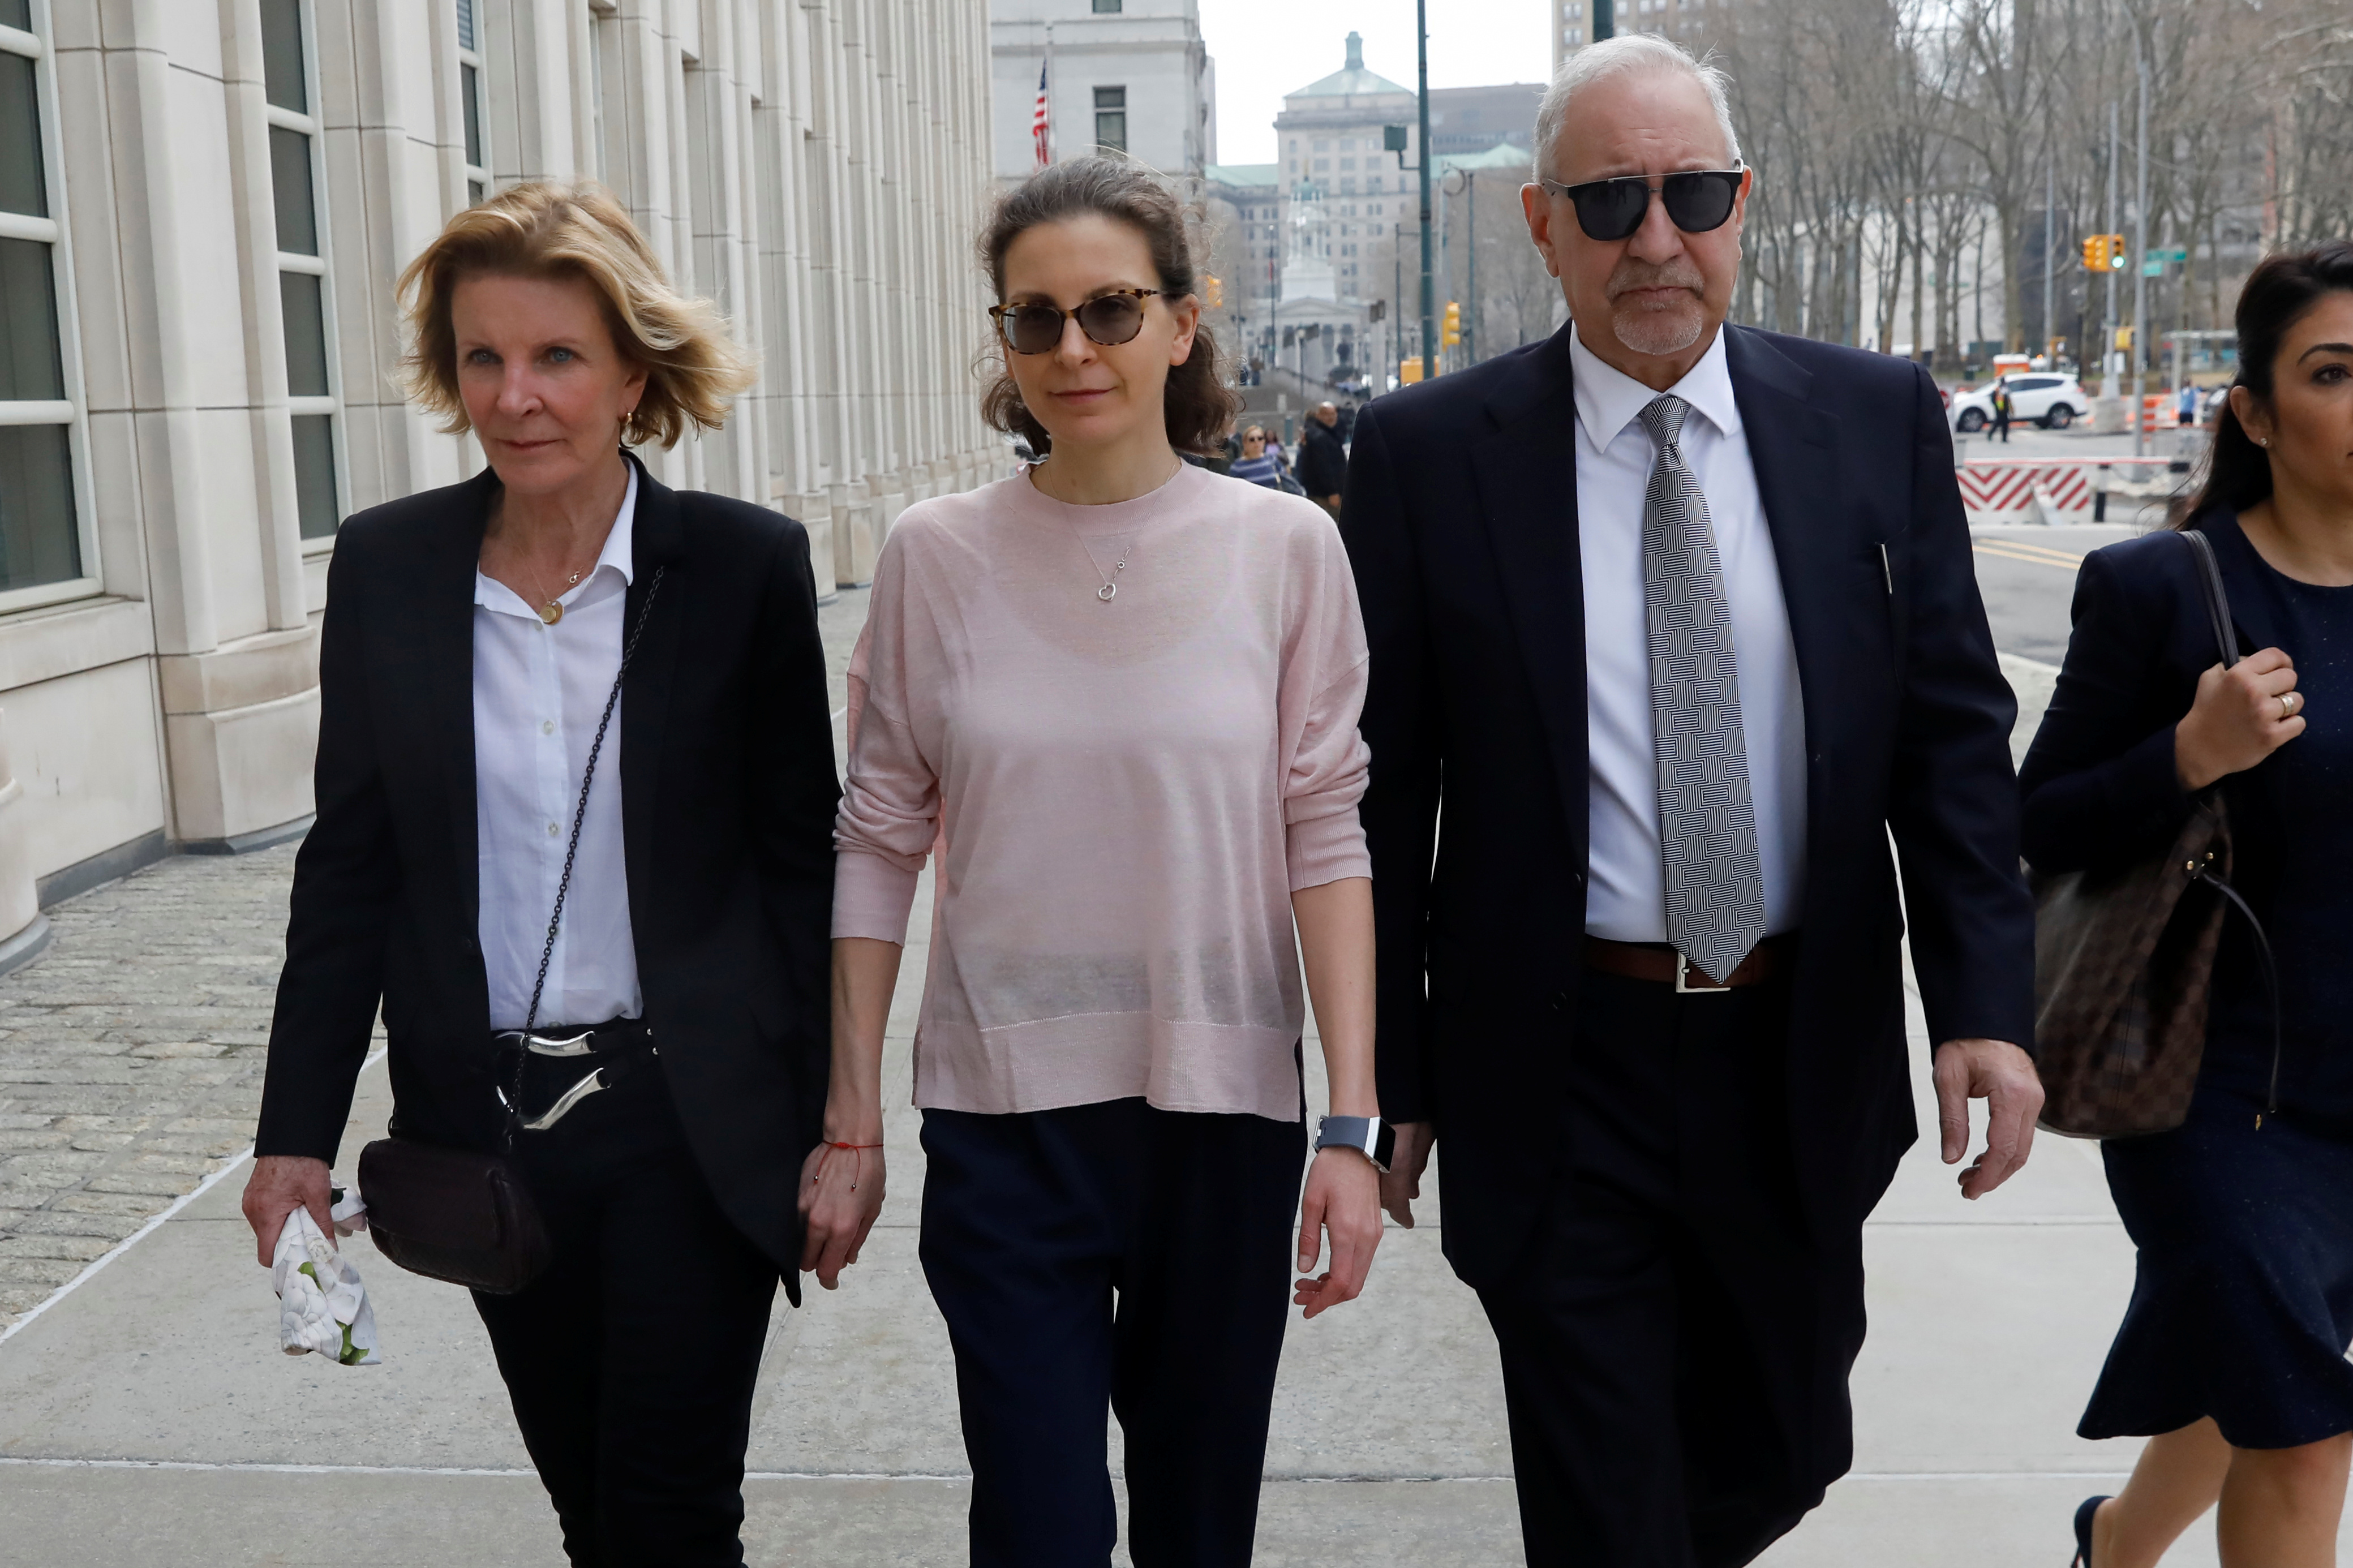 Clare Bronfman, an heiress of the Seagram's liquor empire, arrives at the Brooklyn Federal Courthouse to face charges regarding sex trafficking and racketeering related to the Nxivm cult case in New York, U.S., April 8, 2019. REUTERS/Shannon Stapleton